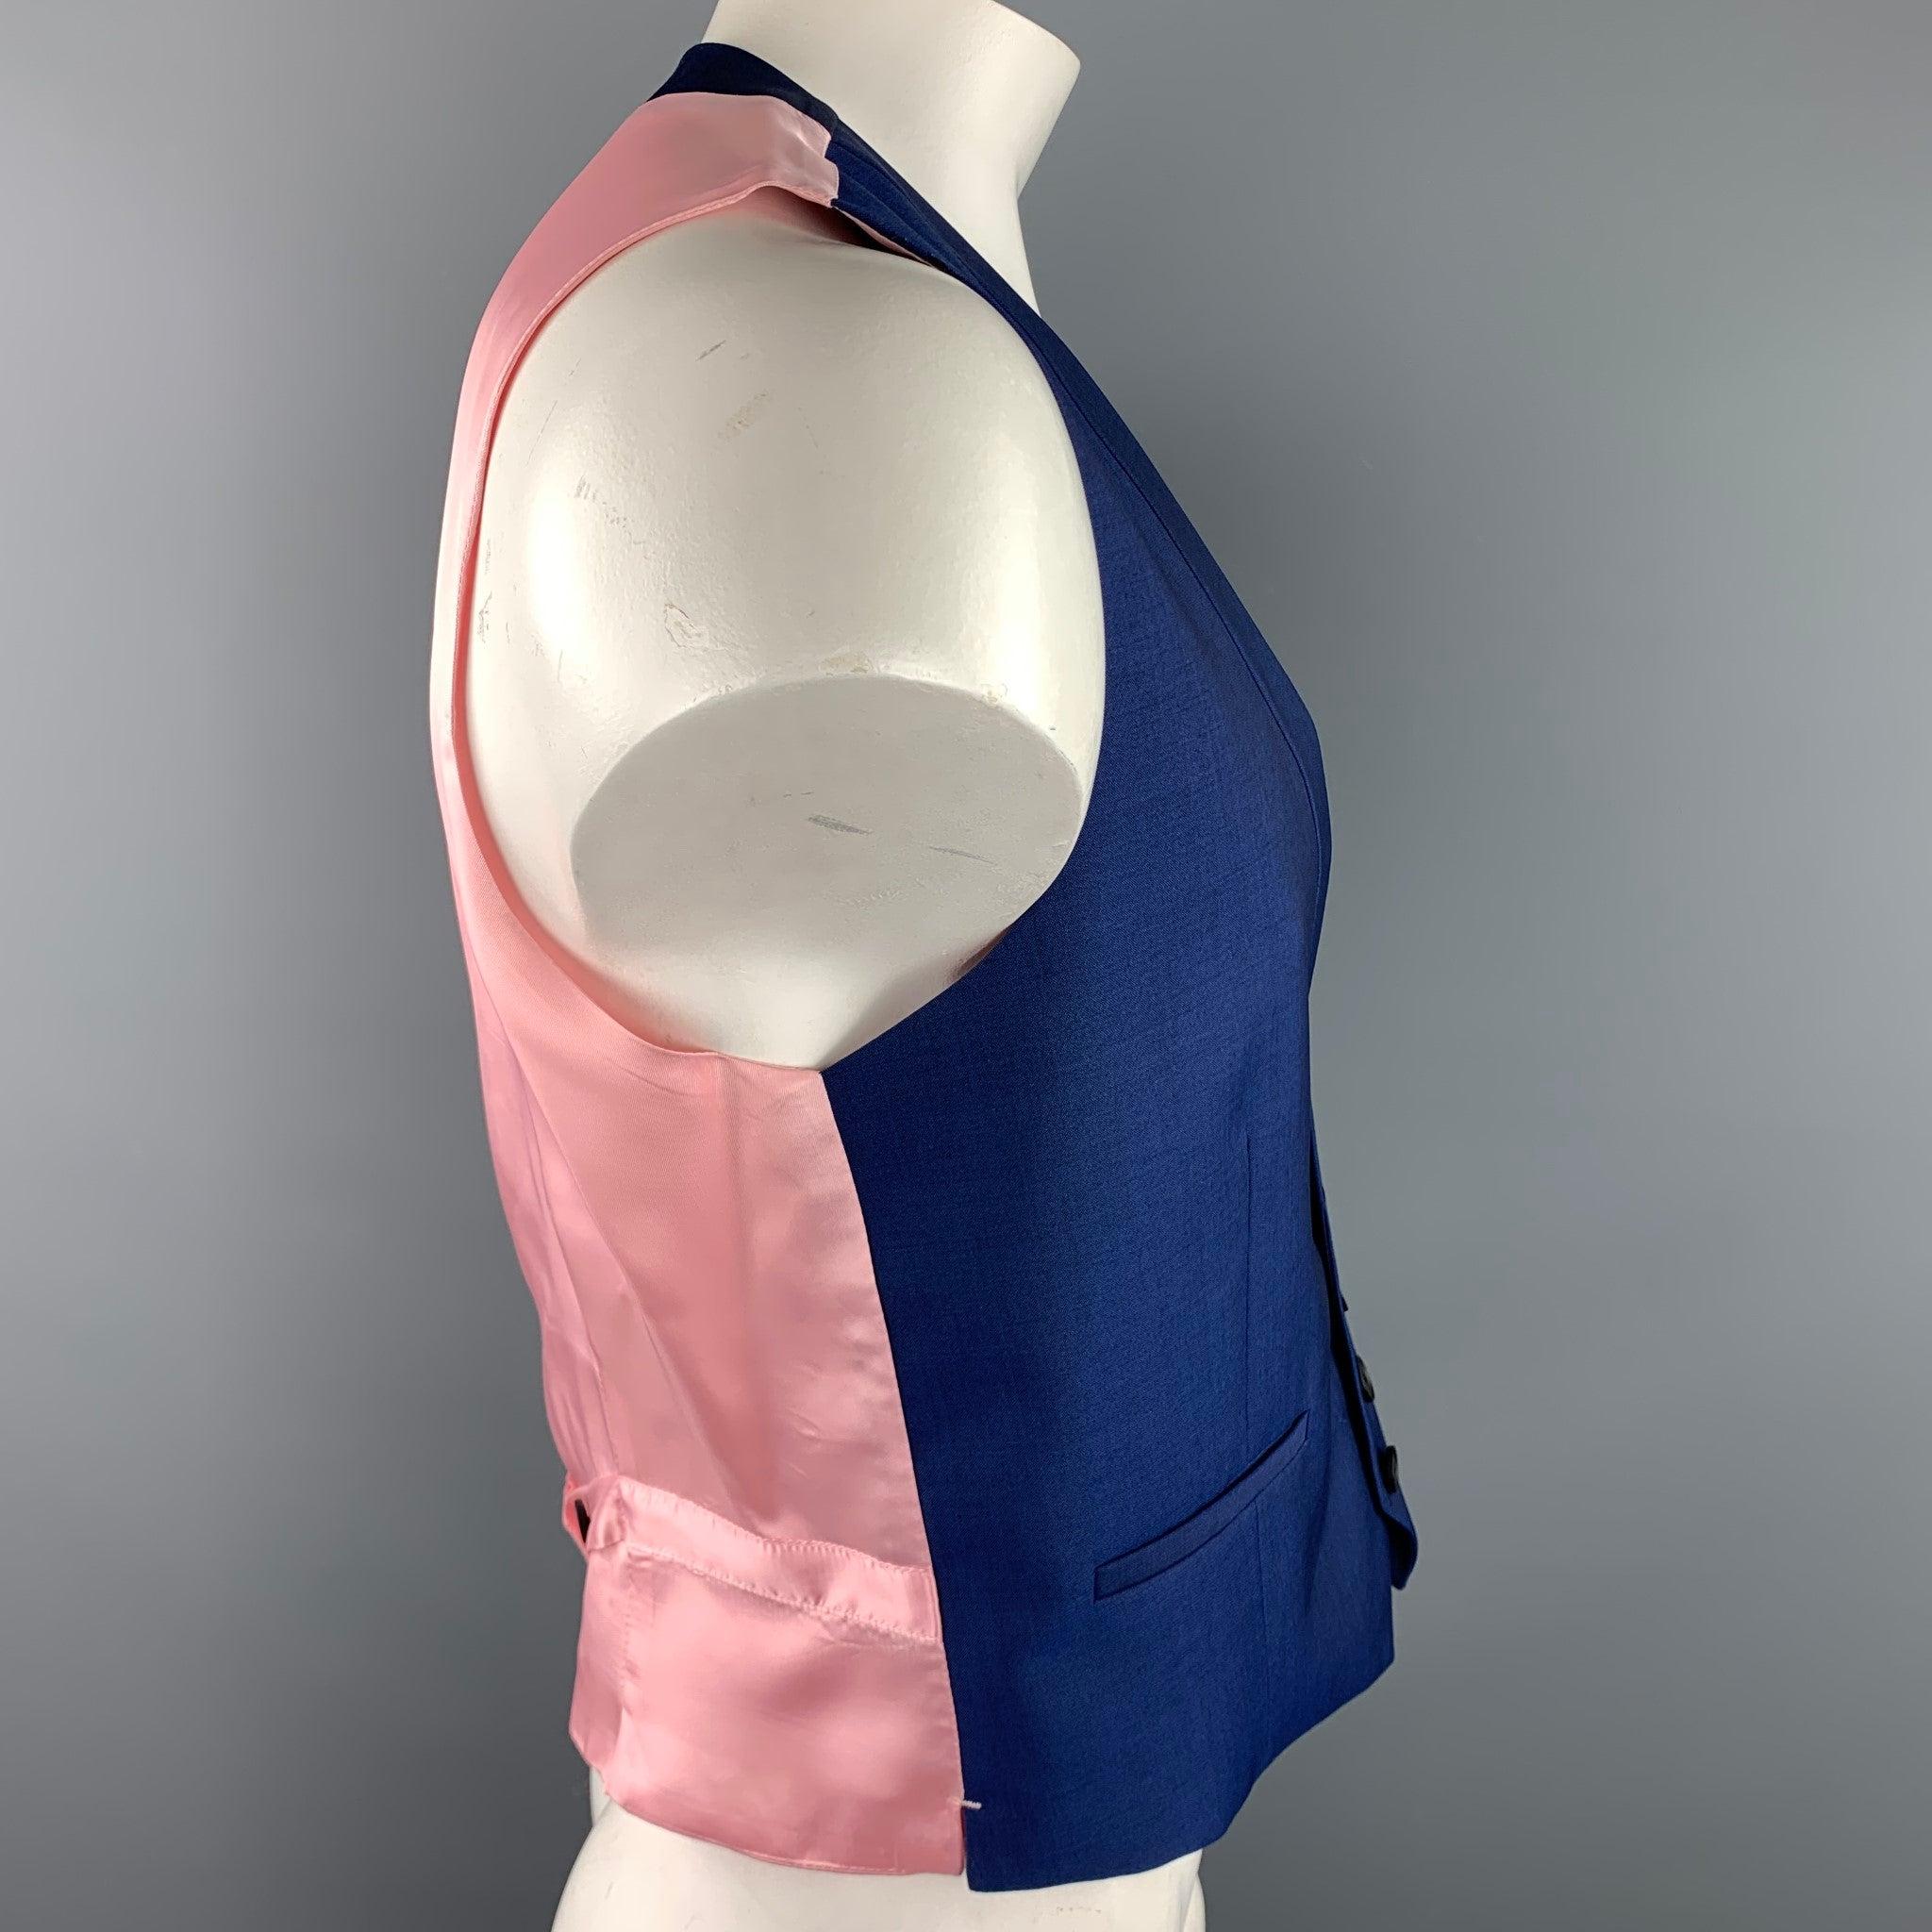 PAUL SMITH vest comes in a navy wool with a pink back design featuring a shawl collar, slit pockets, and a buttoned closure. Made in Italy.Excellent
Pre-Owned Condition. 

Marked:   R 42 

Measurements: 
 
Shoulder: 14 inches 
Chest: 40 inches